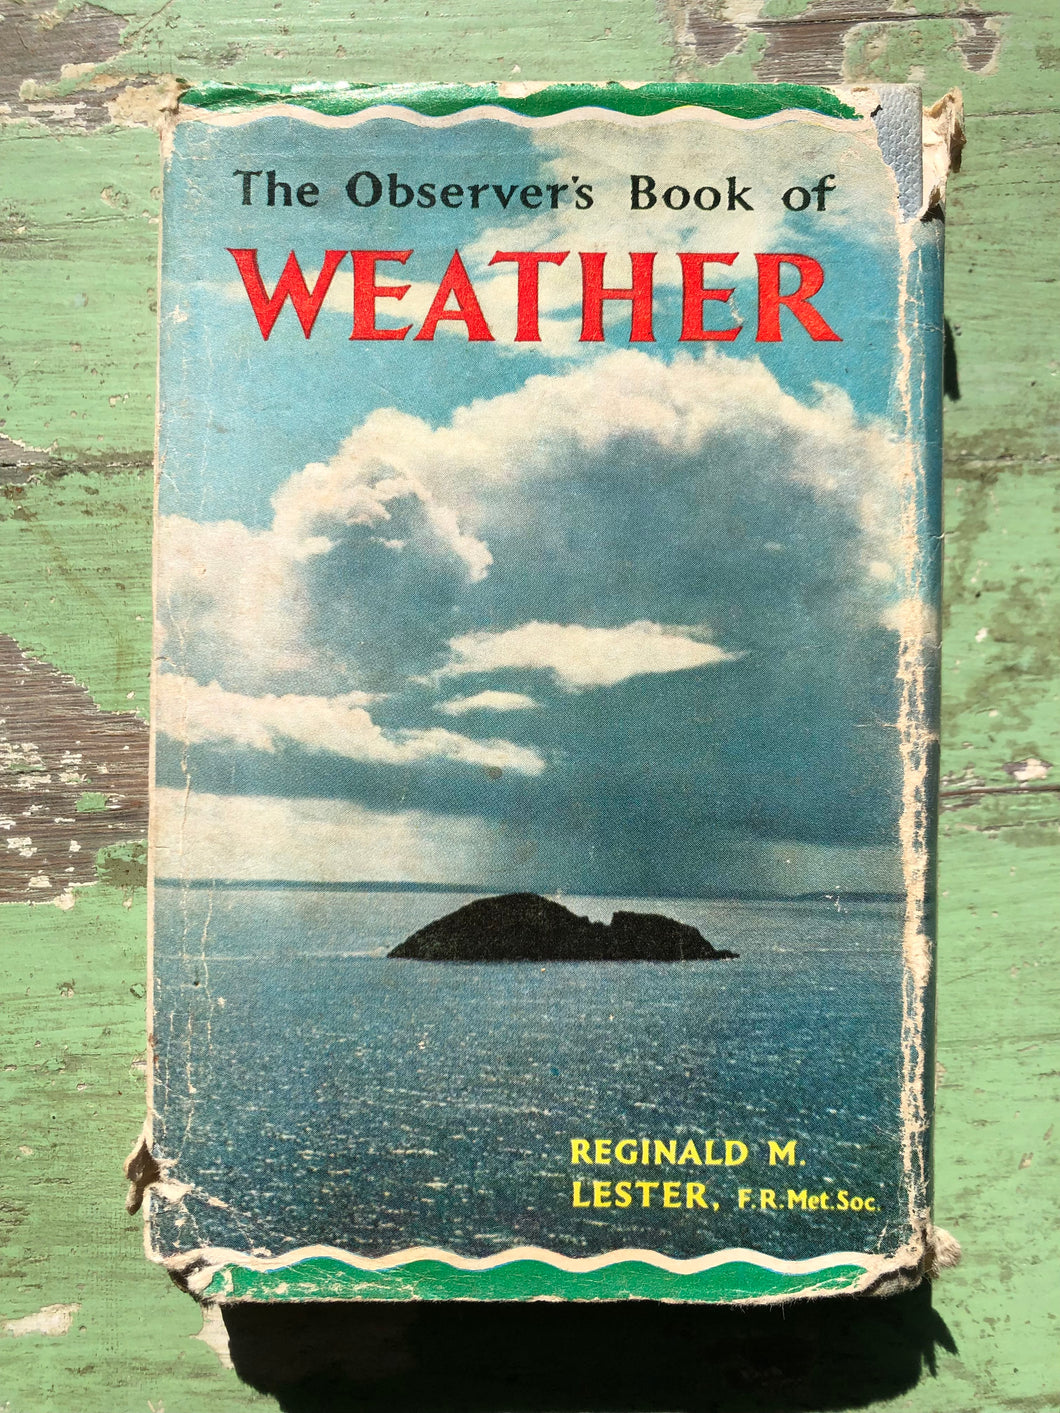 The Observer's Book of Weather. Compiled by G. Evans